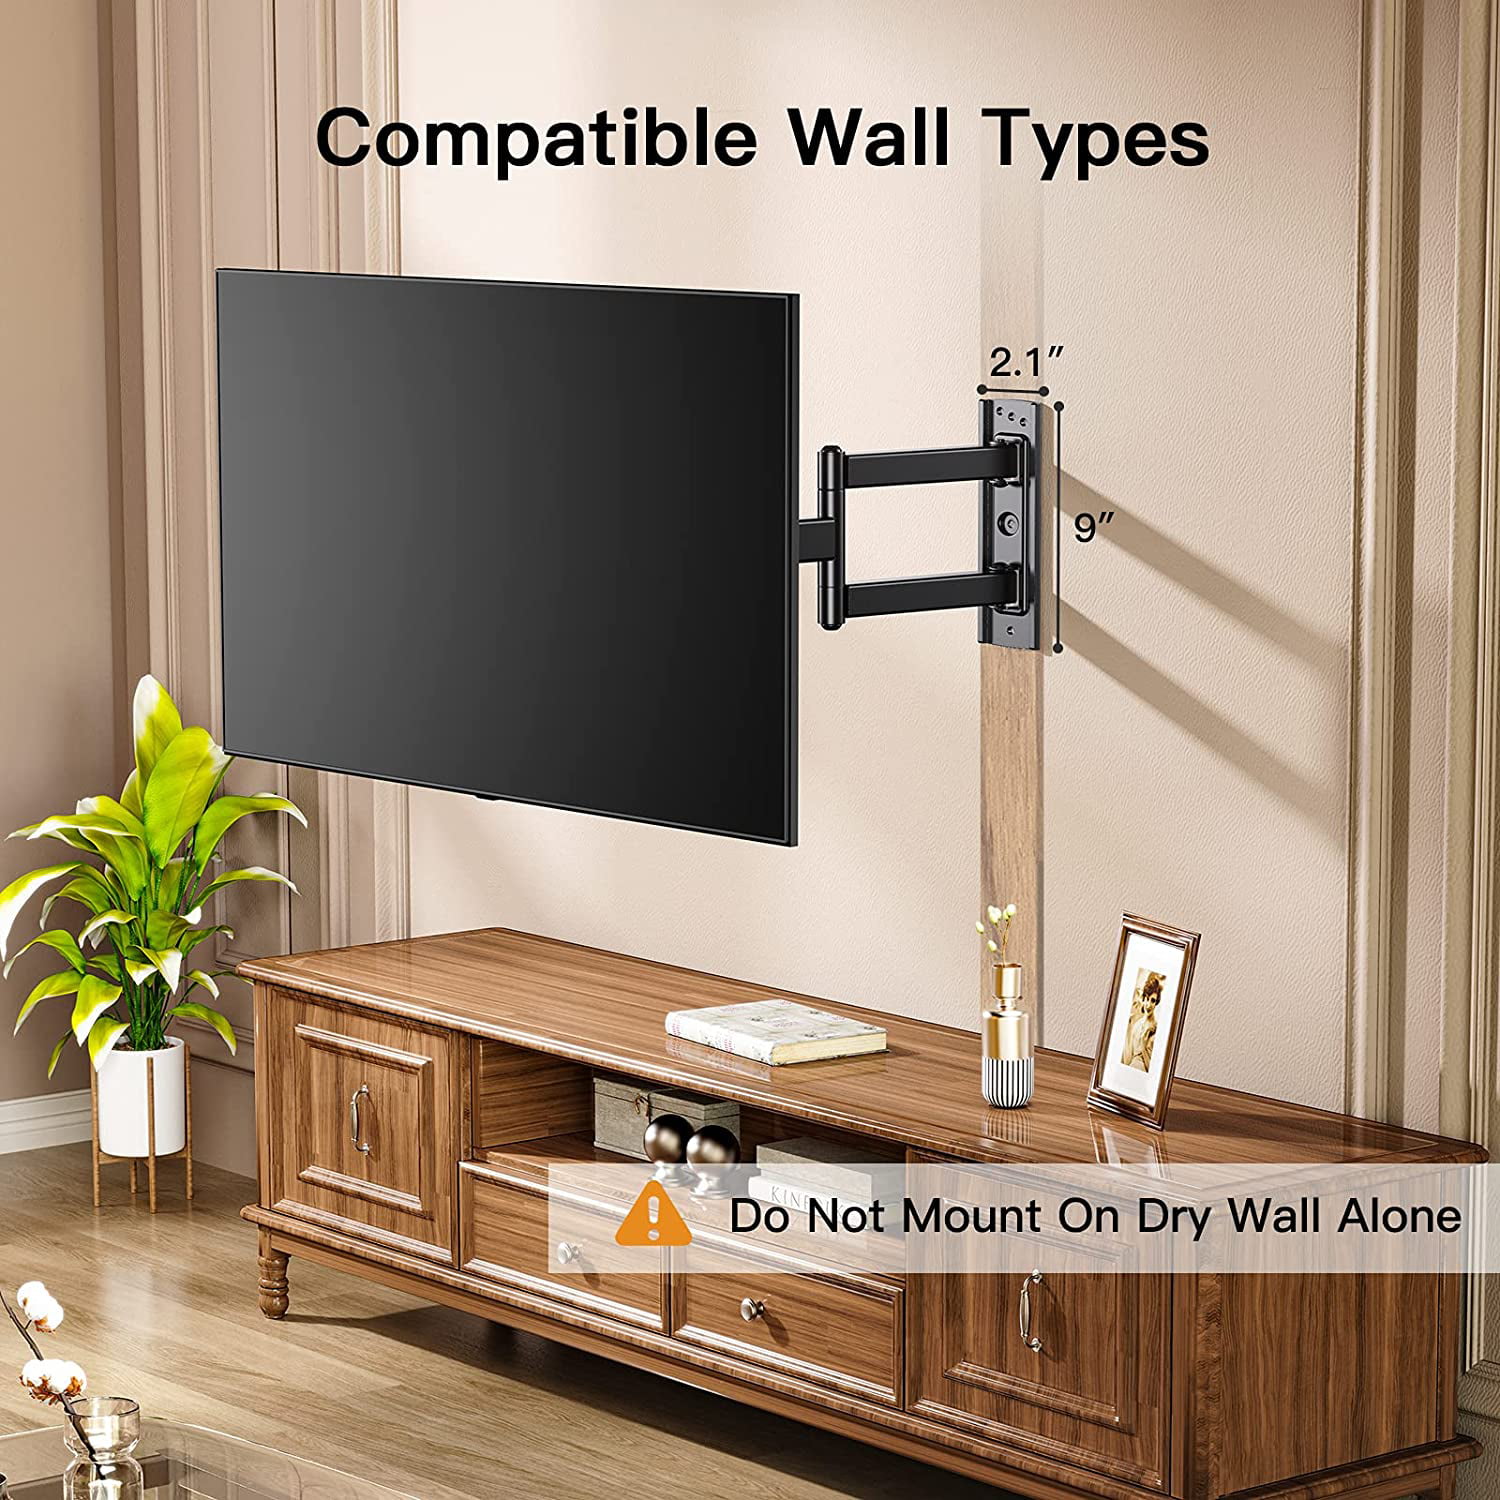  Full Motion TV Mount YD3002 for Most 26-55 Inch Flat Screen  TVs, Max VESA 400x400, Holds up to 77 lbs. YD3004 Tilting TV Wall Mount for  26-55 Inch Flat Screen TVs